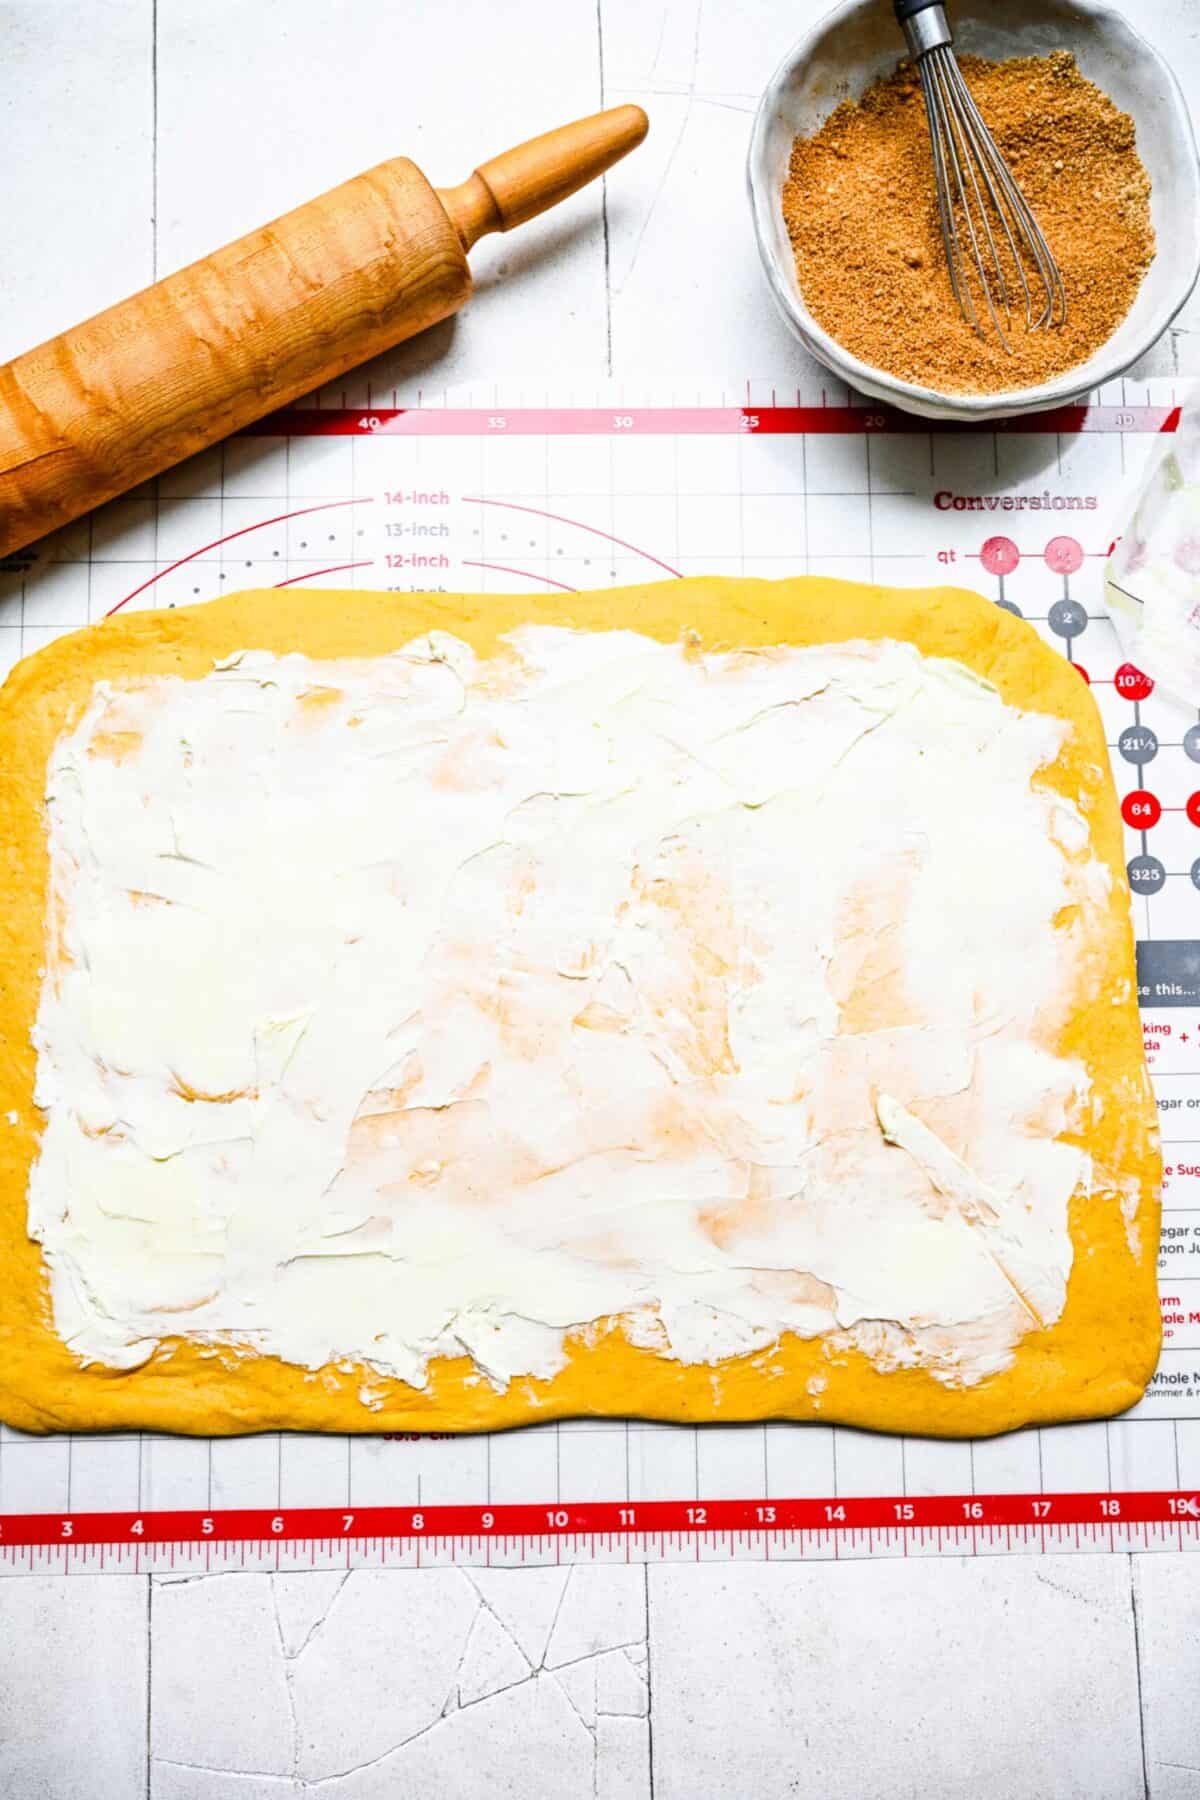 A rectangle of cinnamon roll dough covered in a layer of butter on a ruler mat, next to a rolling pin and a bowl of spice mixture